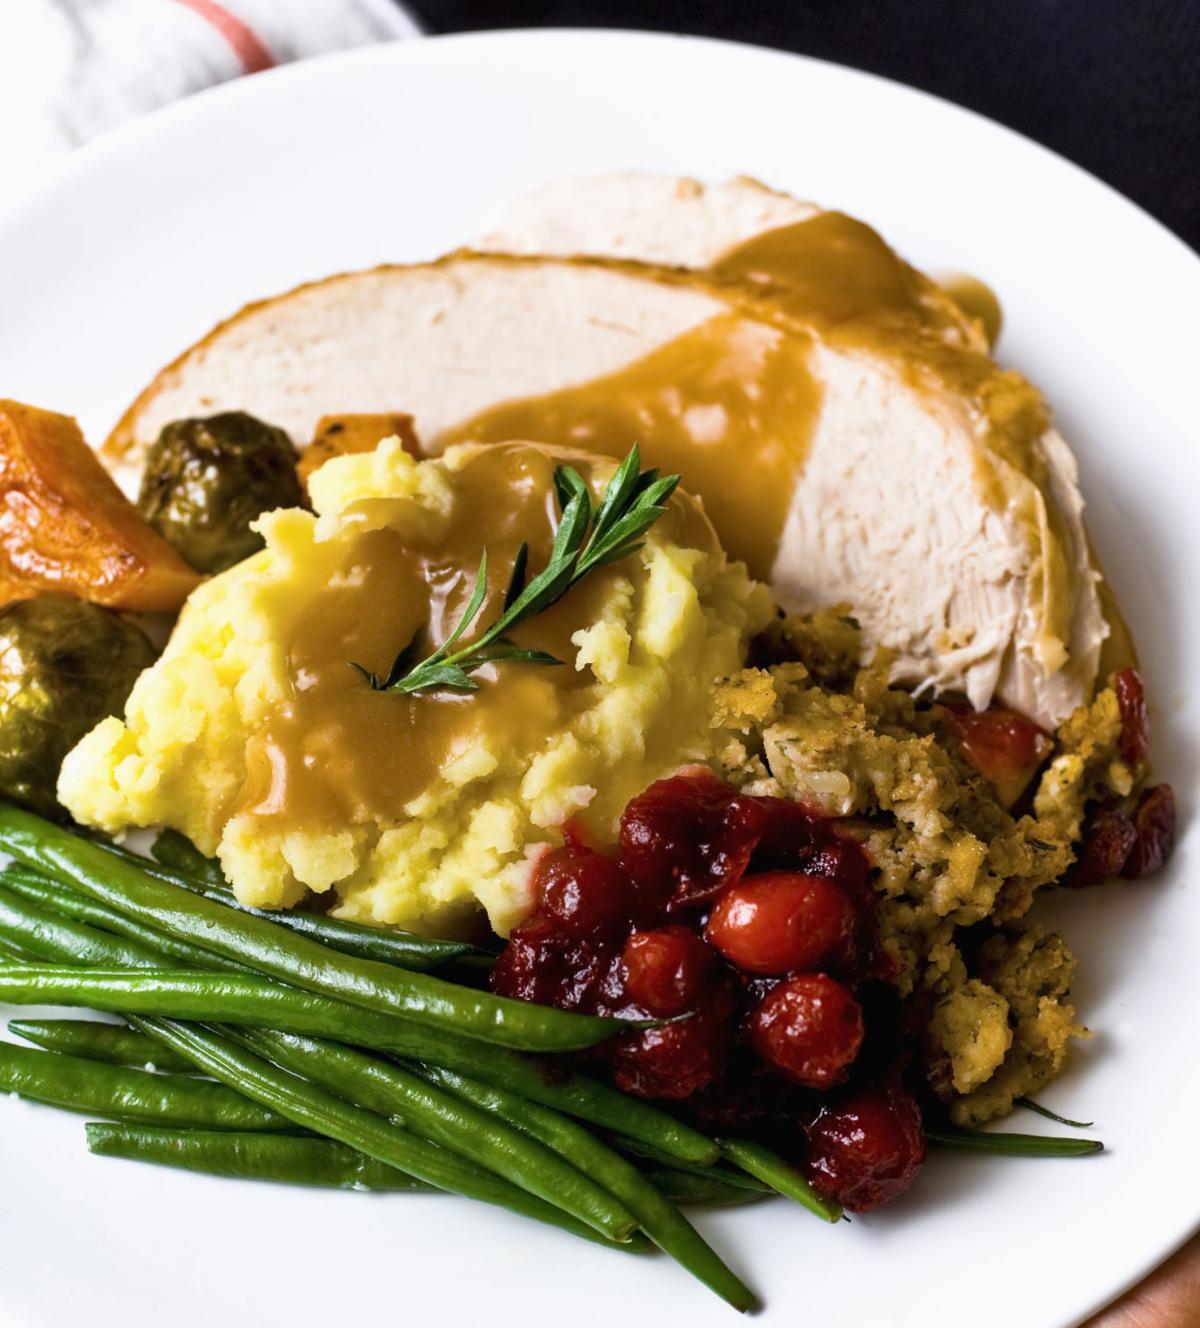 Taste | Turkey 101: Preparing a Thanksgiving meal is not that difficult if you know the basics ...